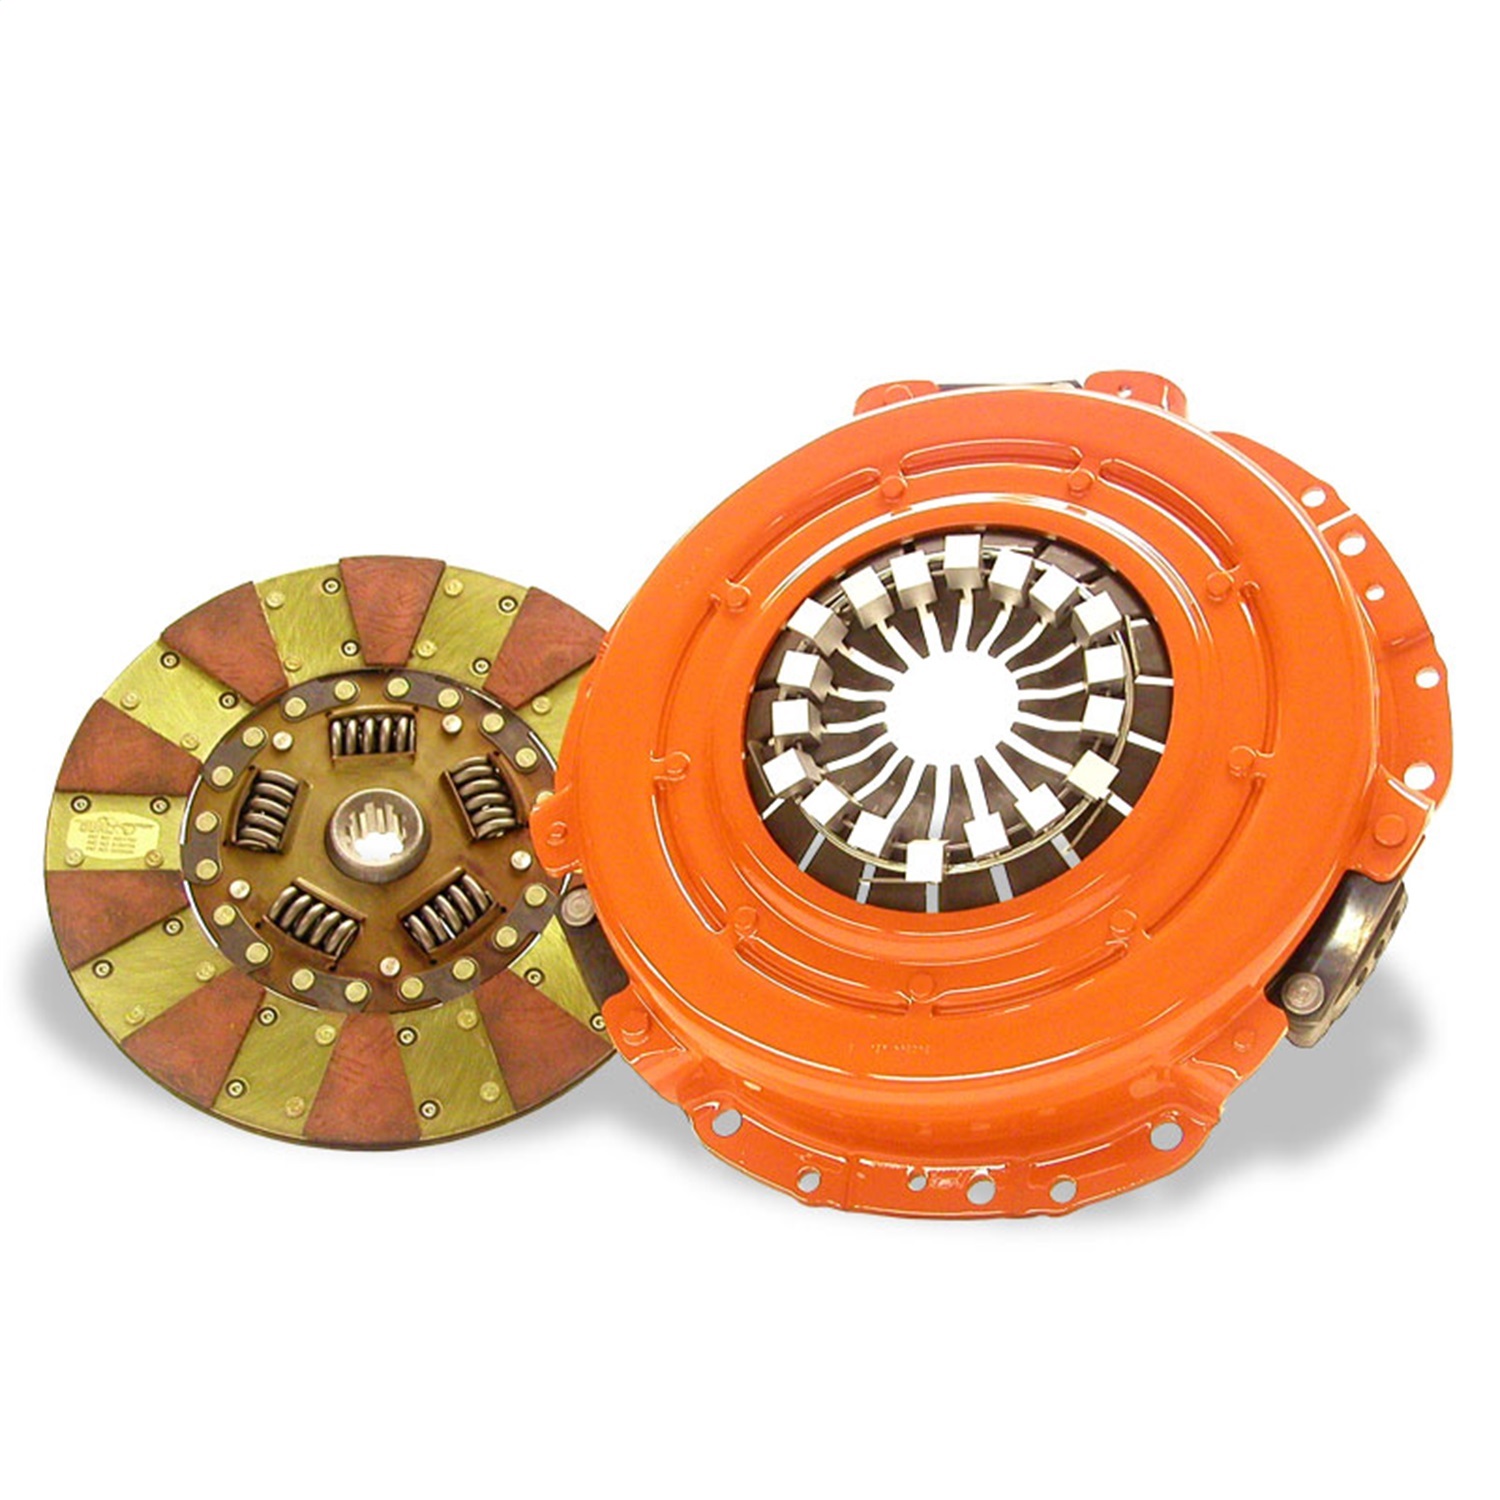 Centerforce Centerforce DF800075 Dual Friction Clutch Pressure Plate And Disc Set